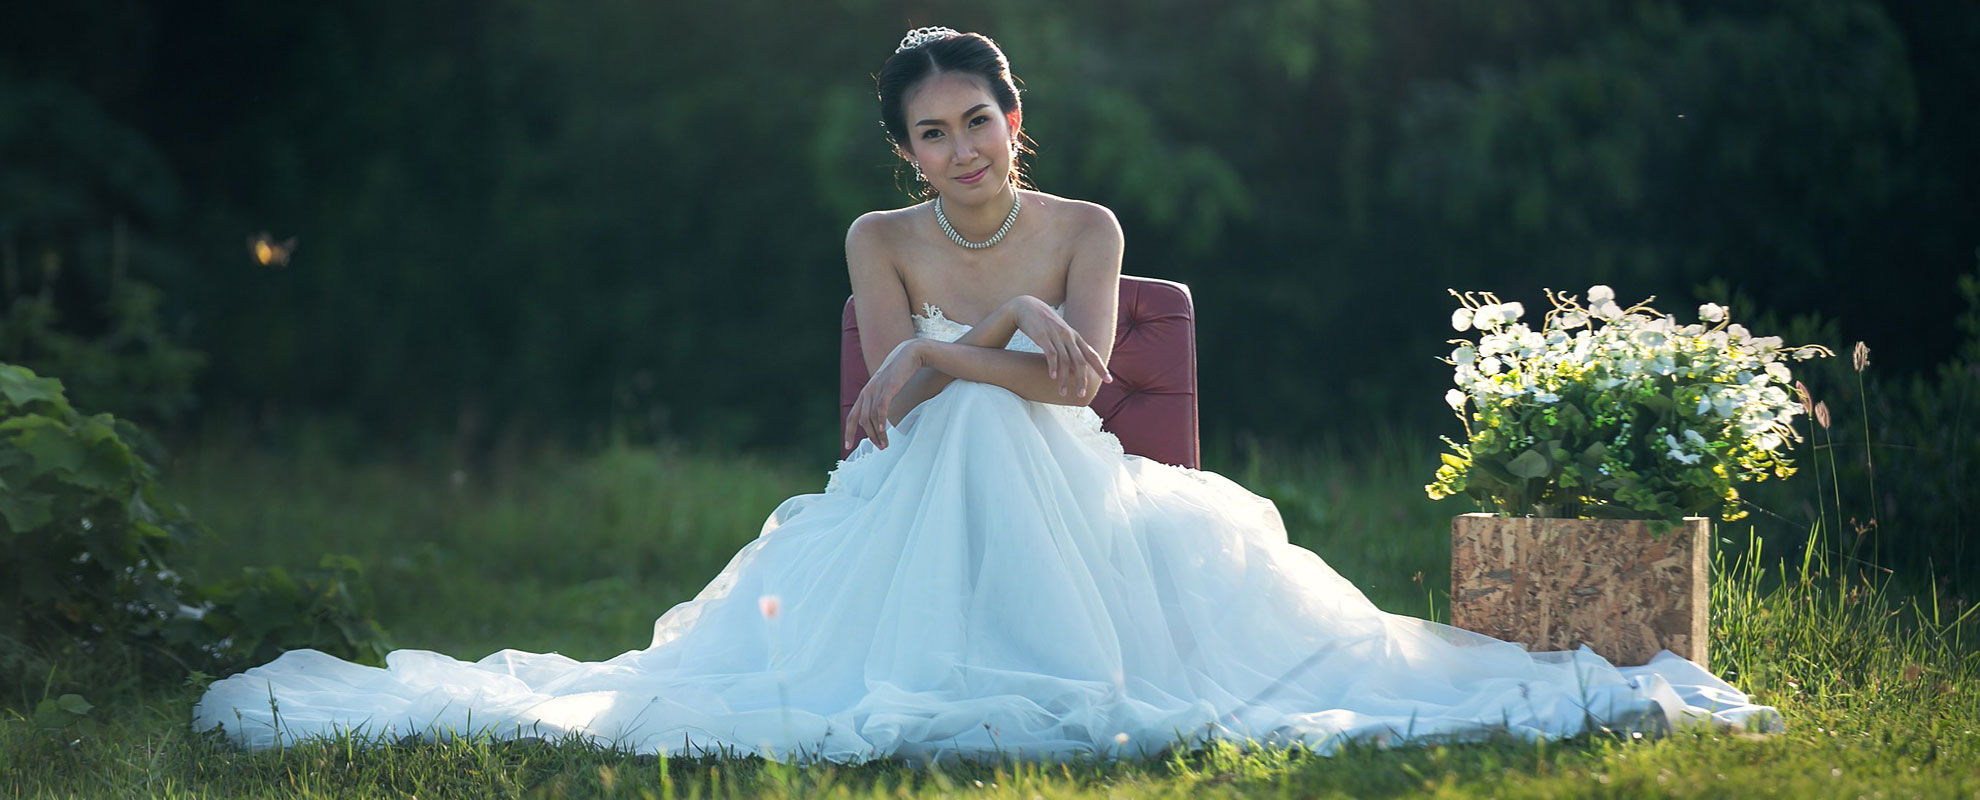 a young bride in a wedding dress sitting outside in a green field